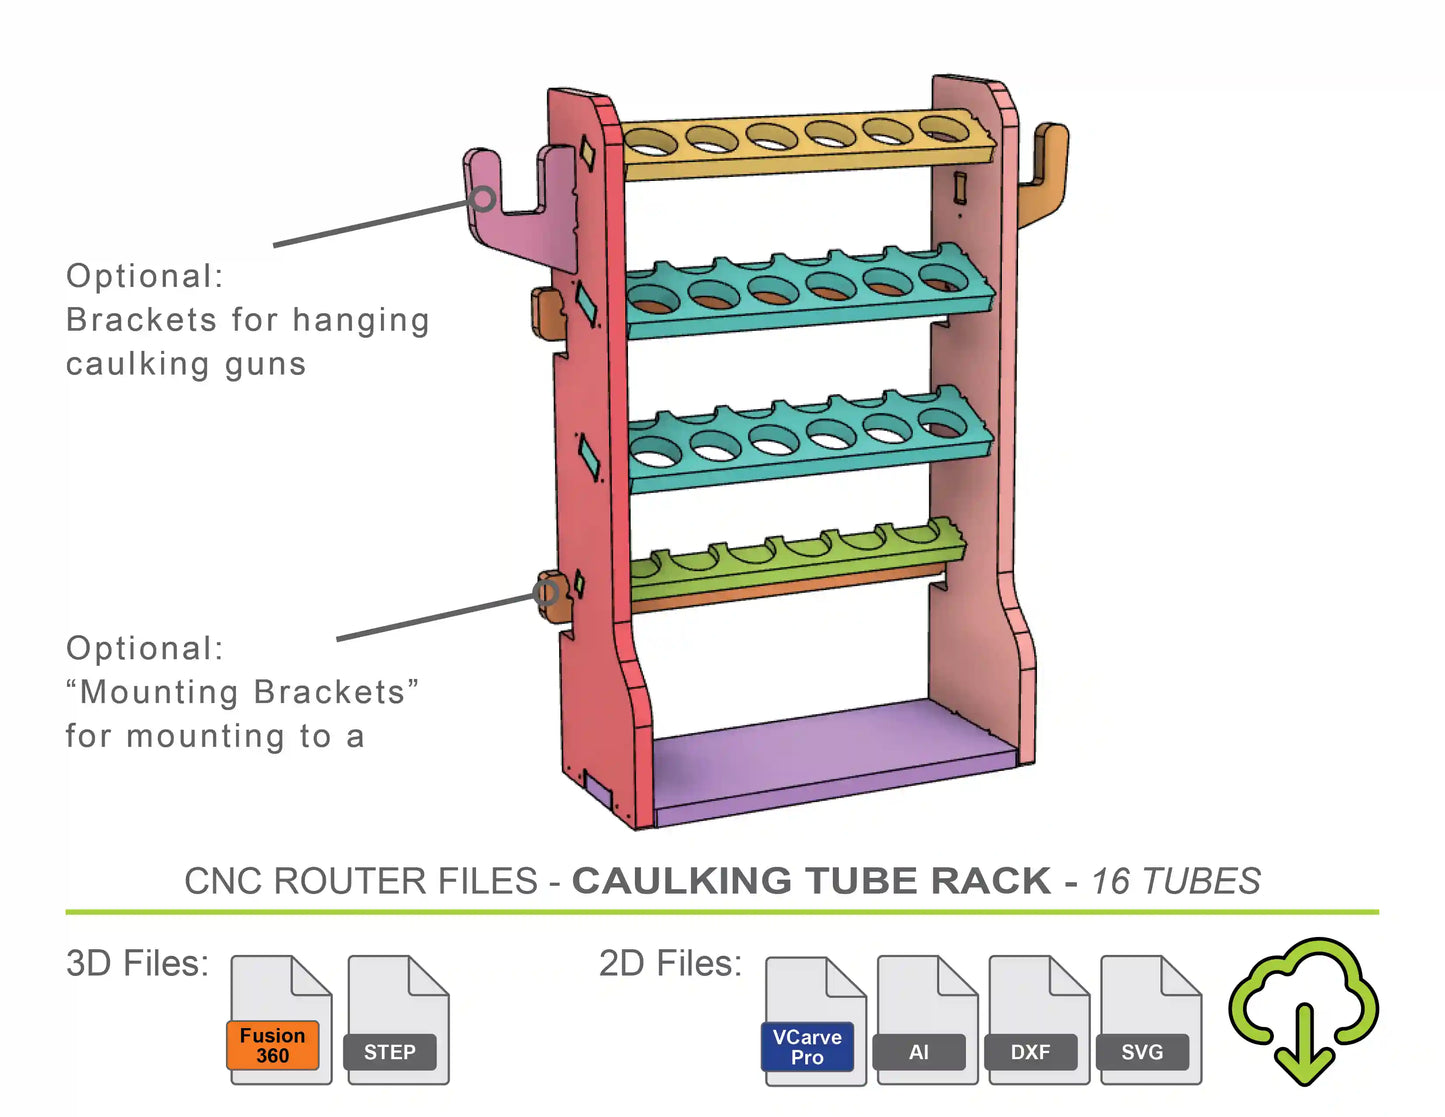 storage rack organizer for tubes of caulking 3d modeled for making on a cnc router machine